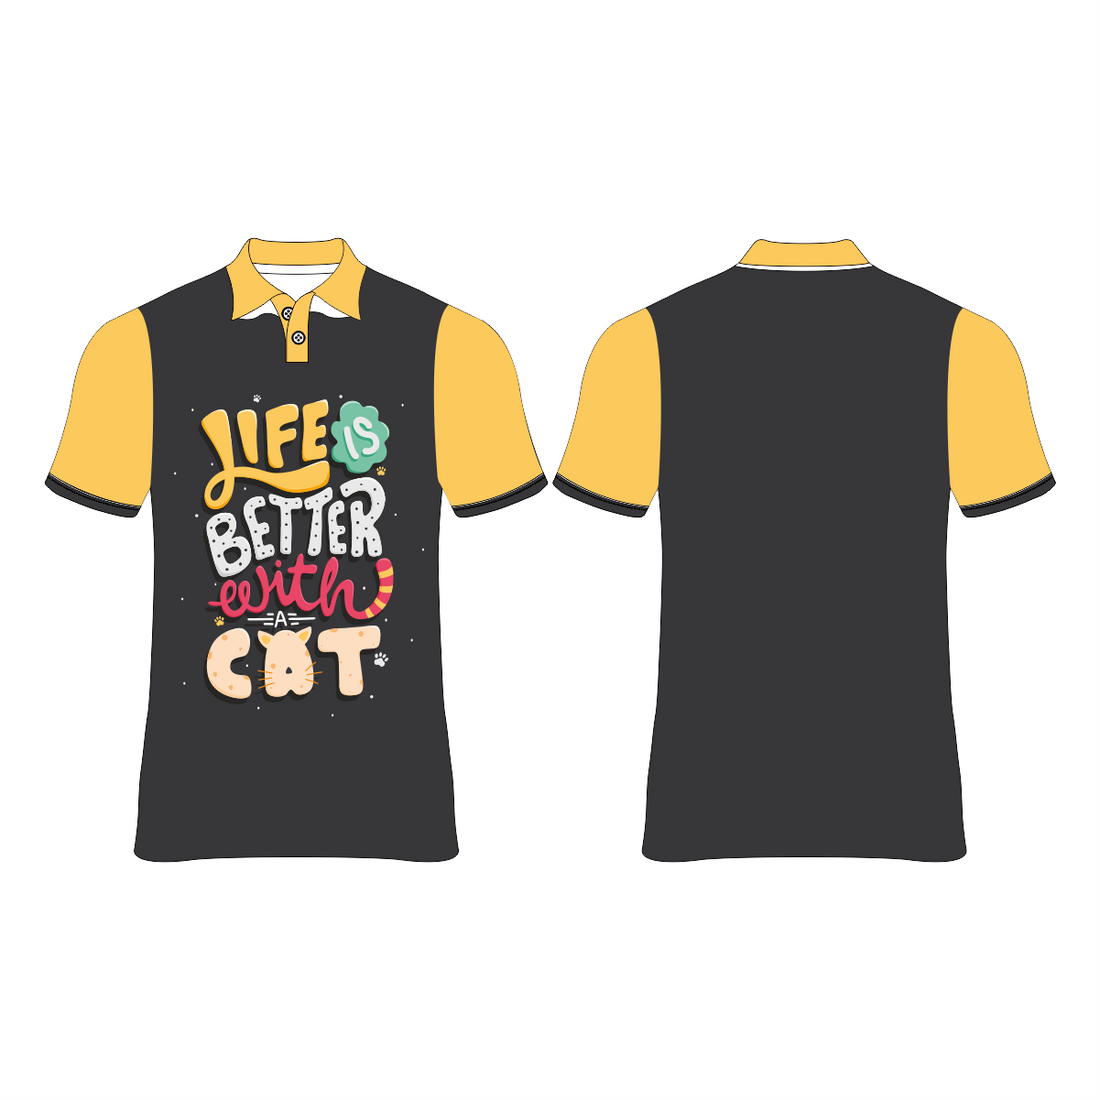 LIFE IS BETTER PRINTED T-SHIRTS